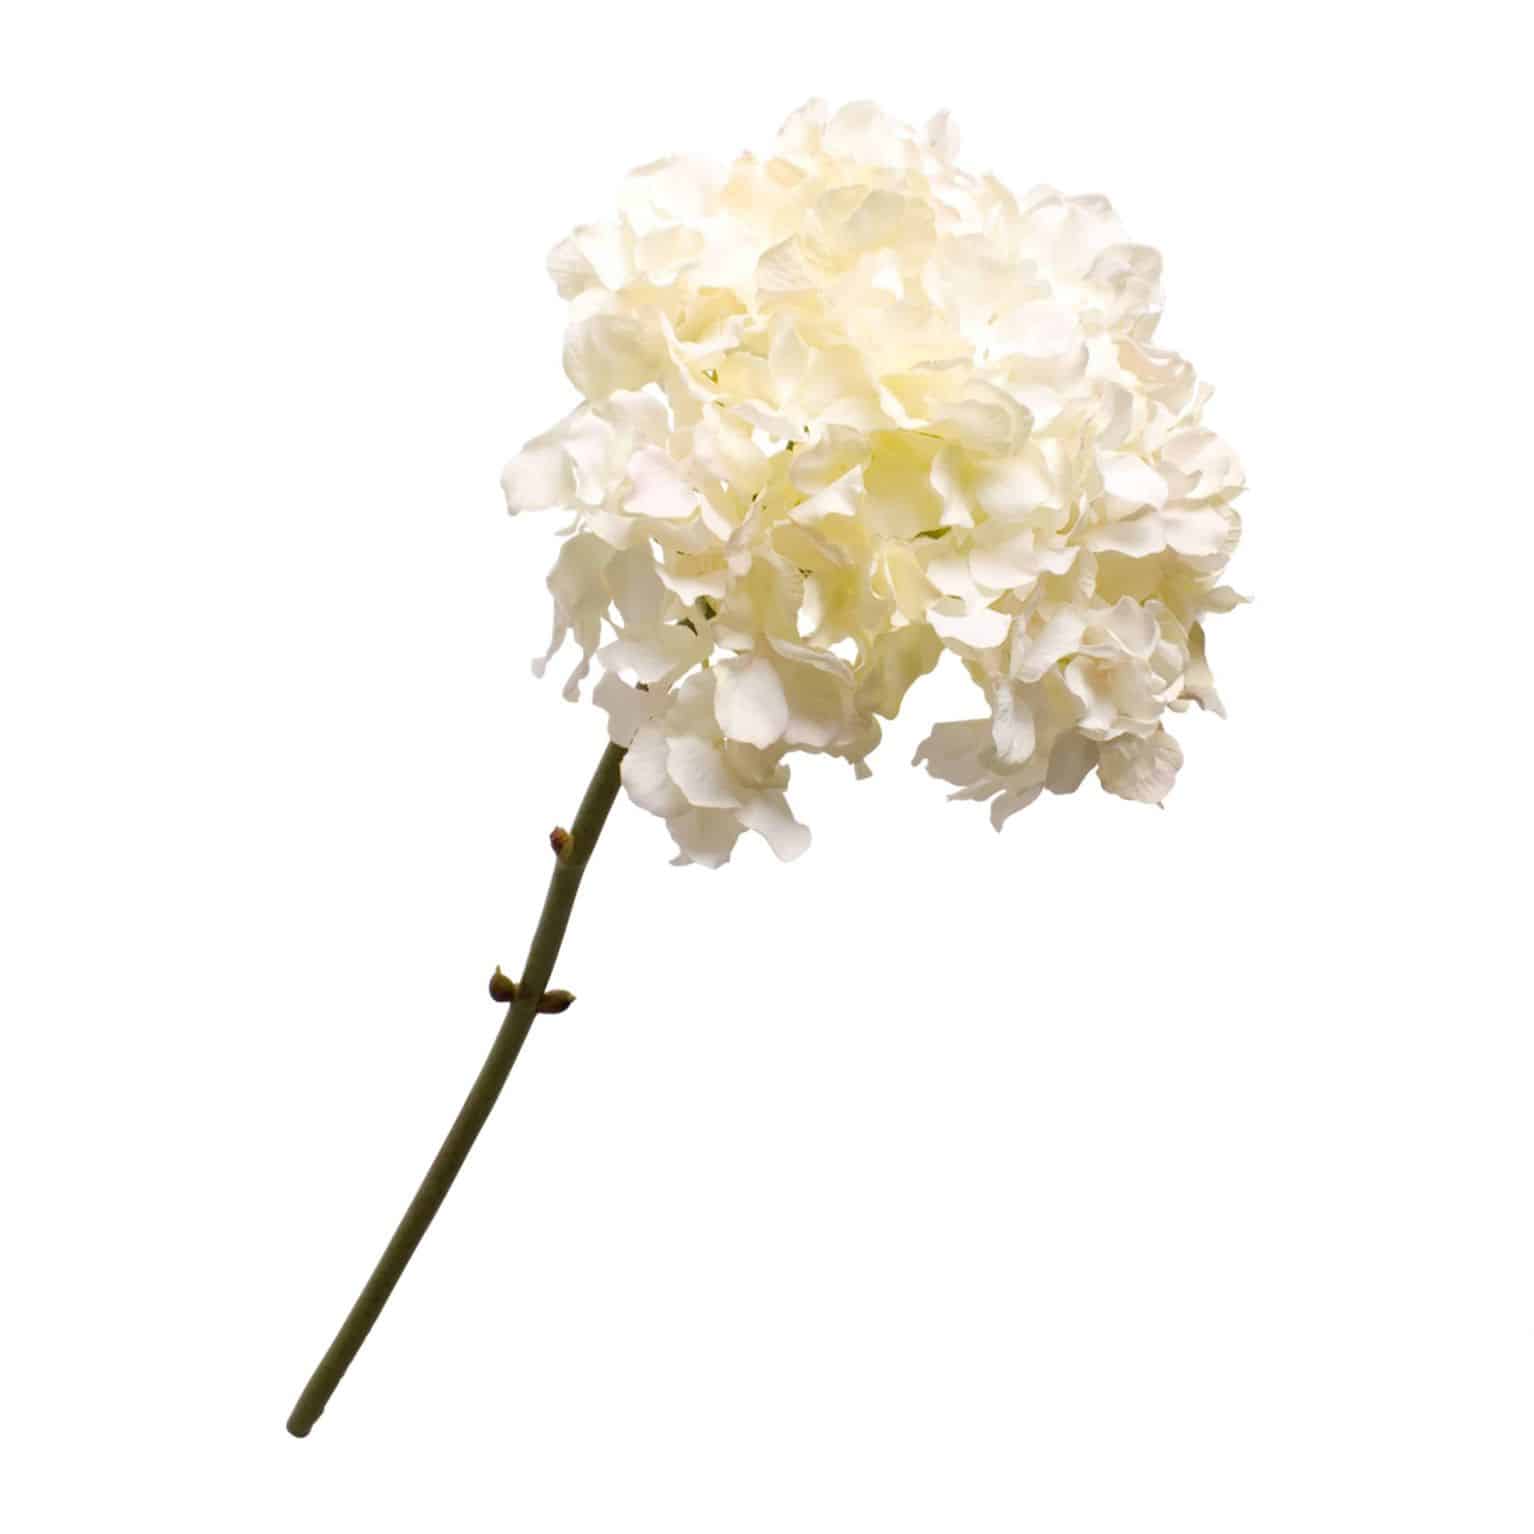 Buy faux hydrangea stem in a soft cream. Stunning arrangement in a single stem & wonderful addition to any floral display.